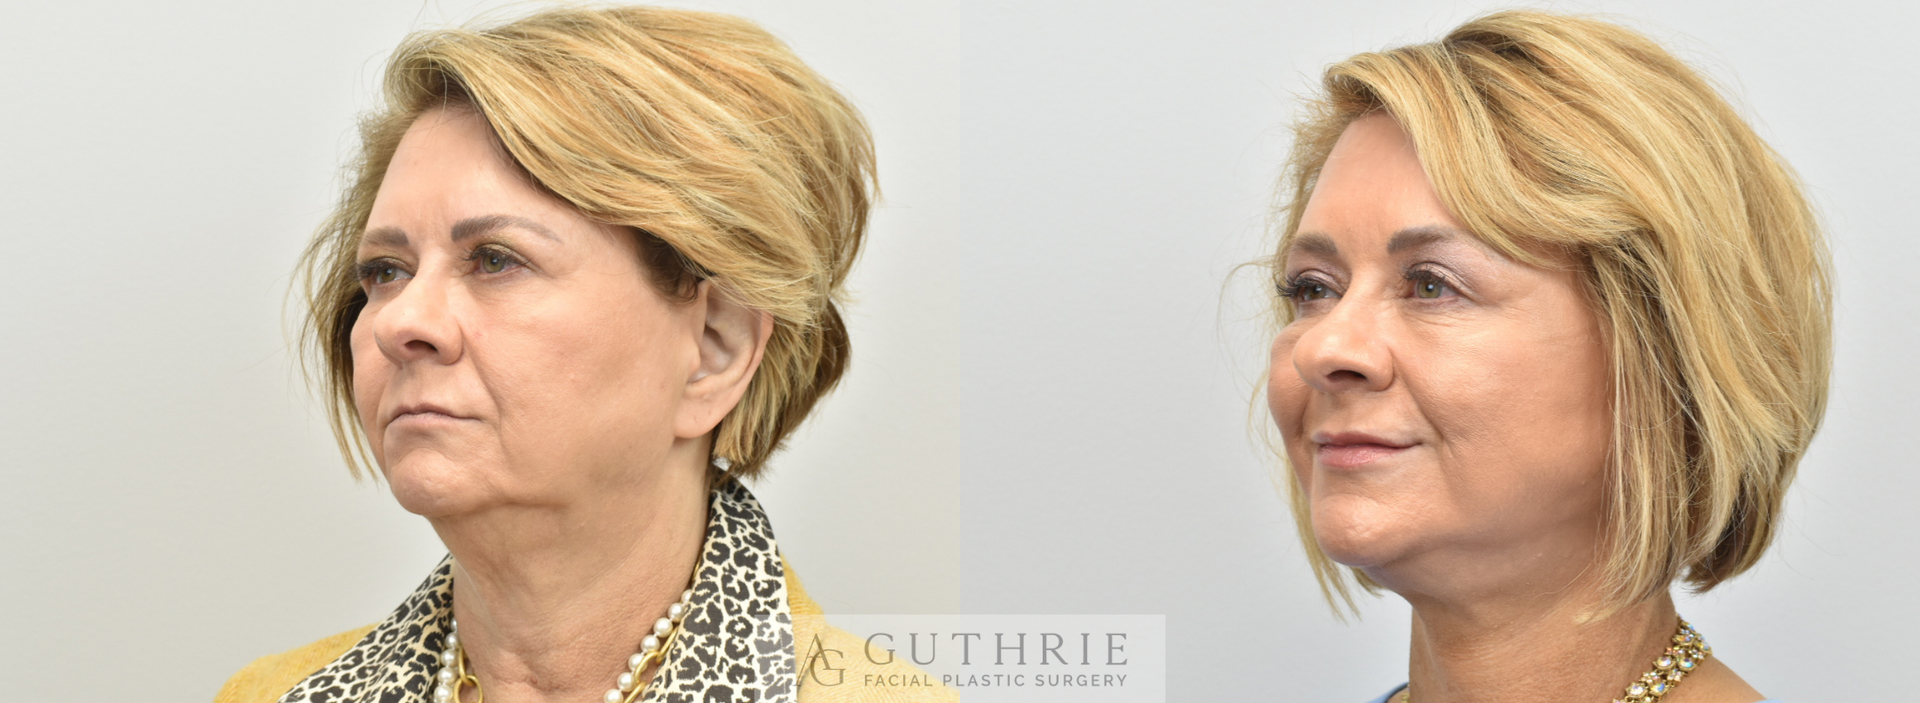 Before and After Facelift, Brow Lift, Lower Blepharoplasty